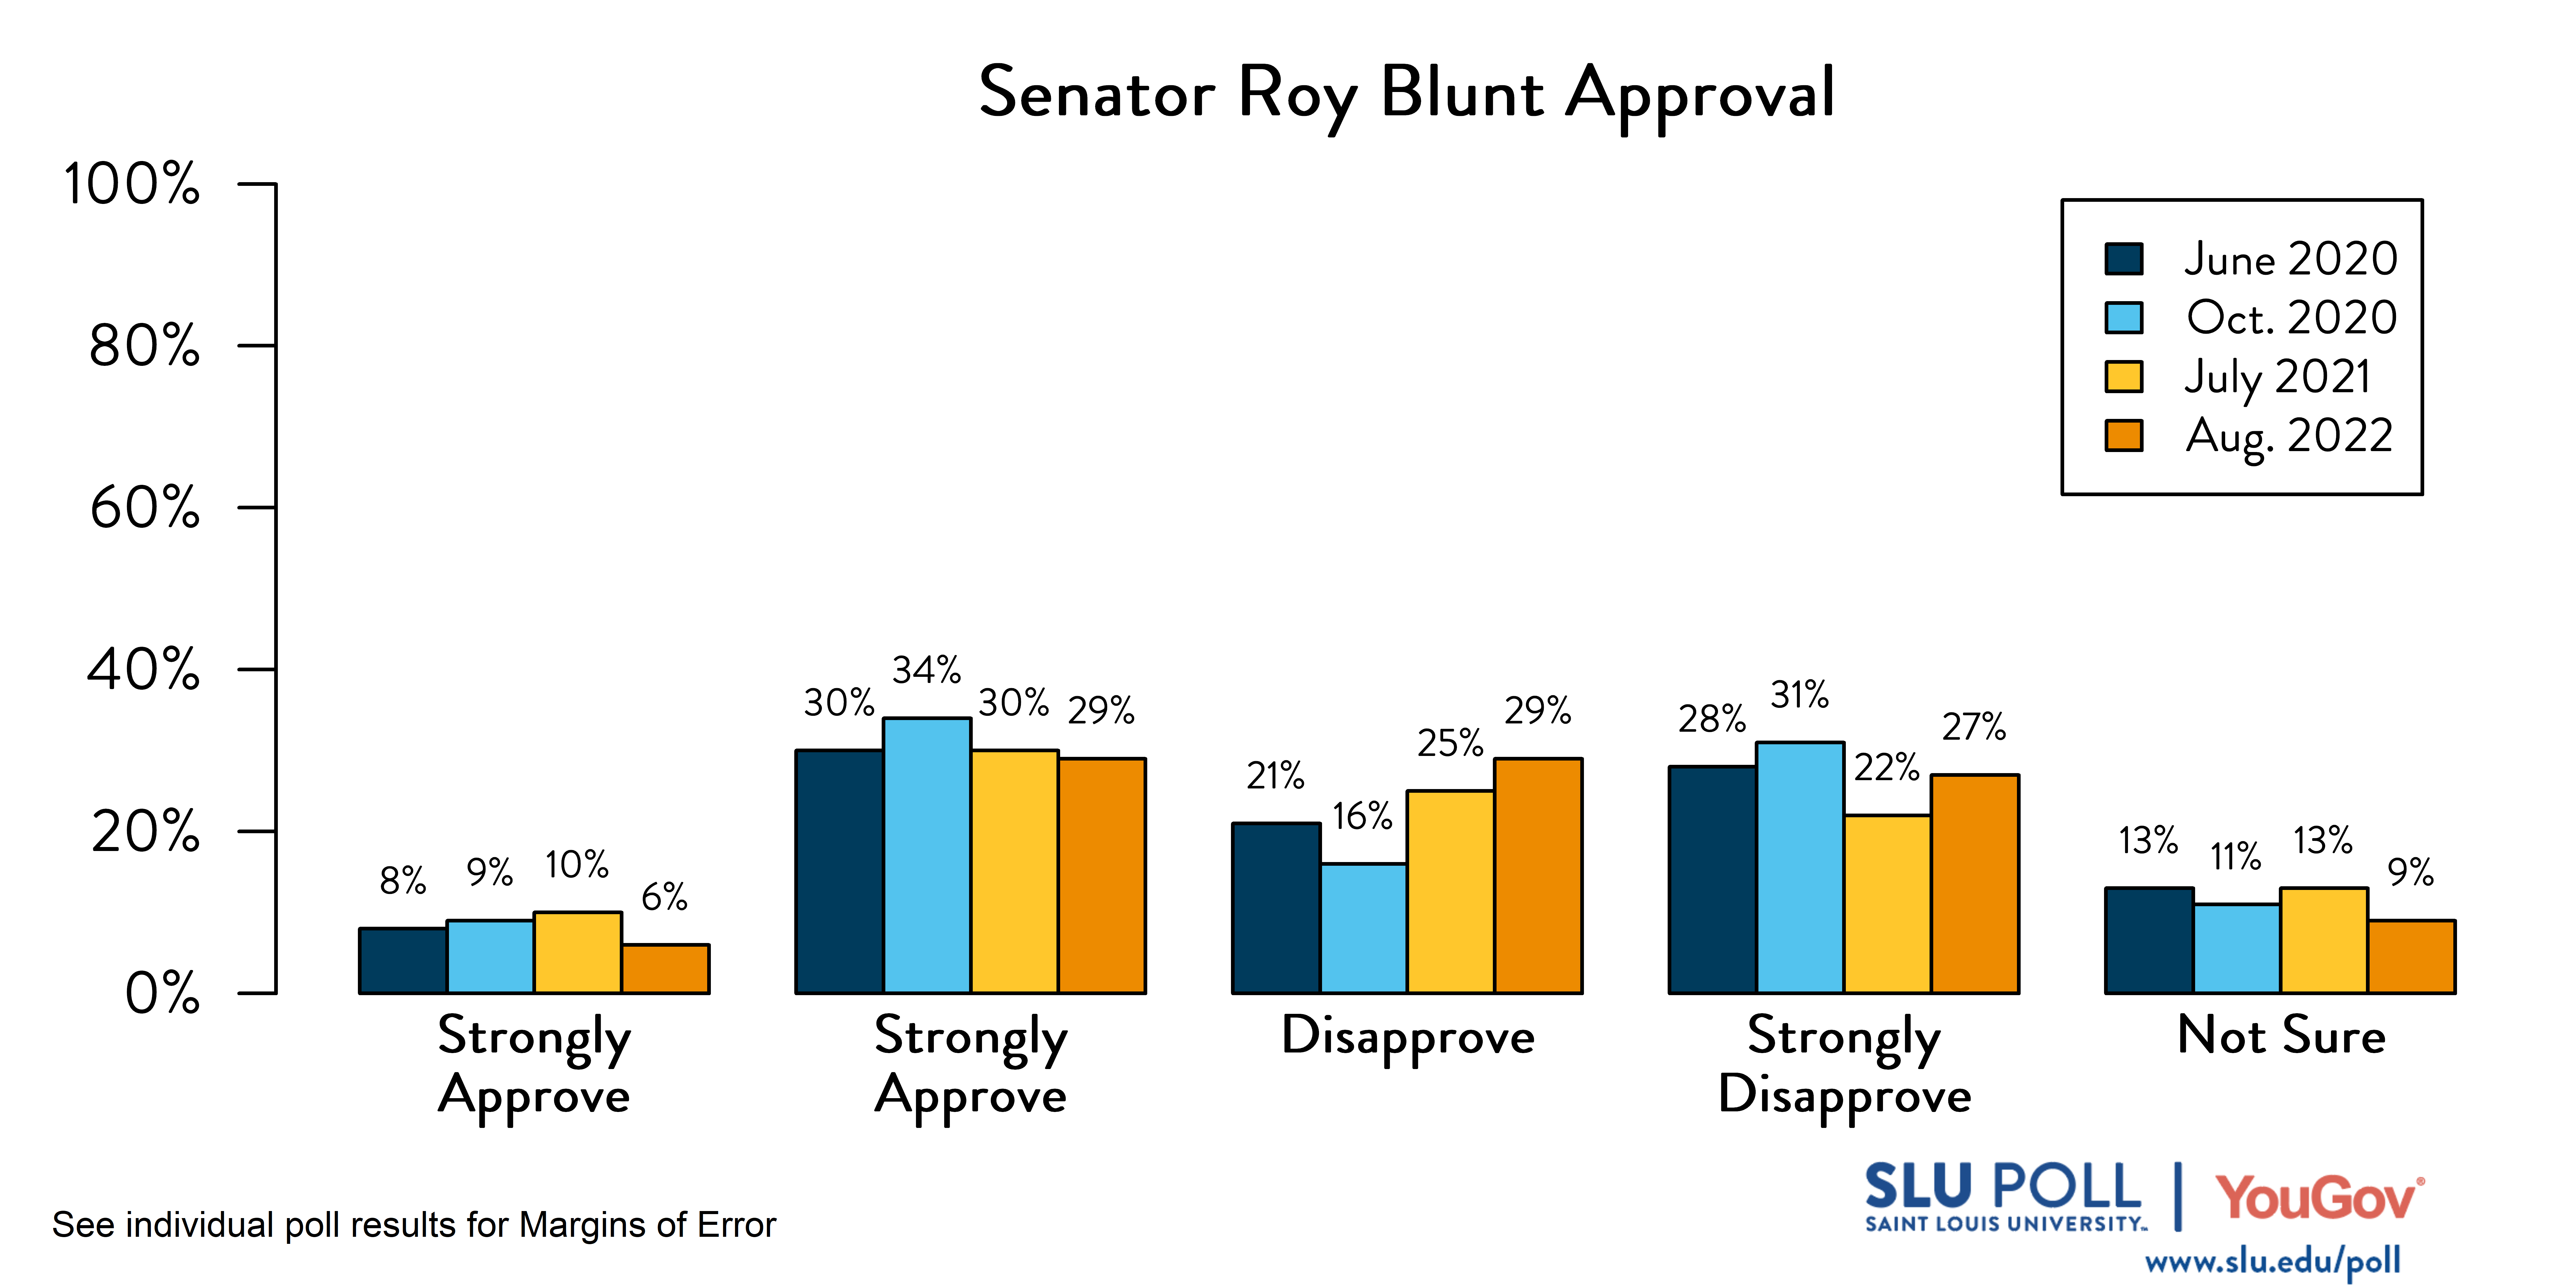 This bar graph demonstrates how Senator Blunt's approval has changed over time.